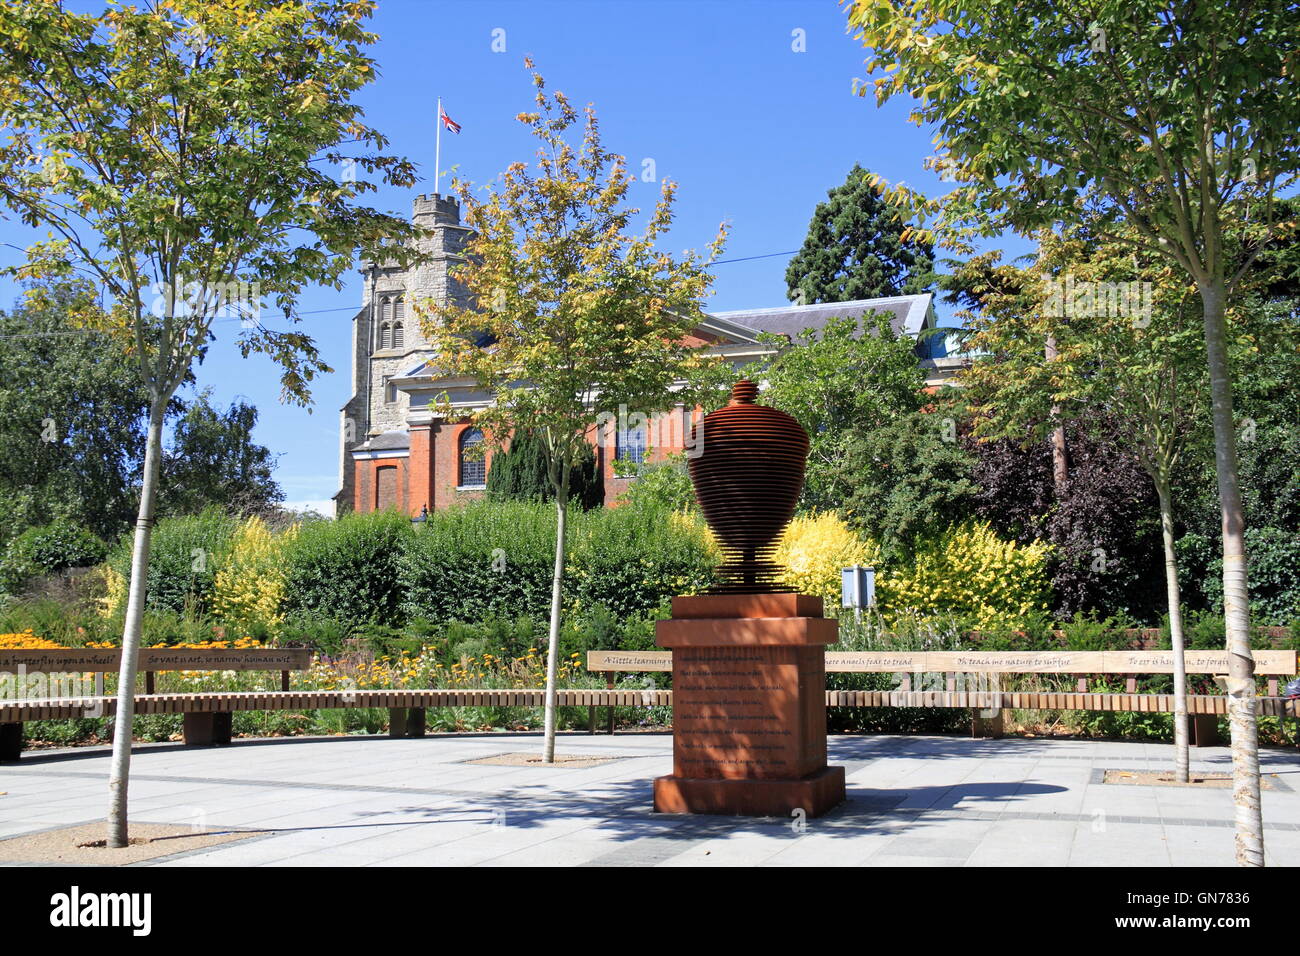 Alexander Pope's Urn sculpture and St Mary's church, Twickenham, Greater London, England, Great Britain United Kingdom UK Europe Stock Photo